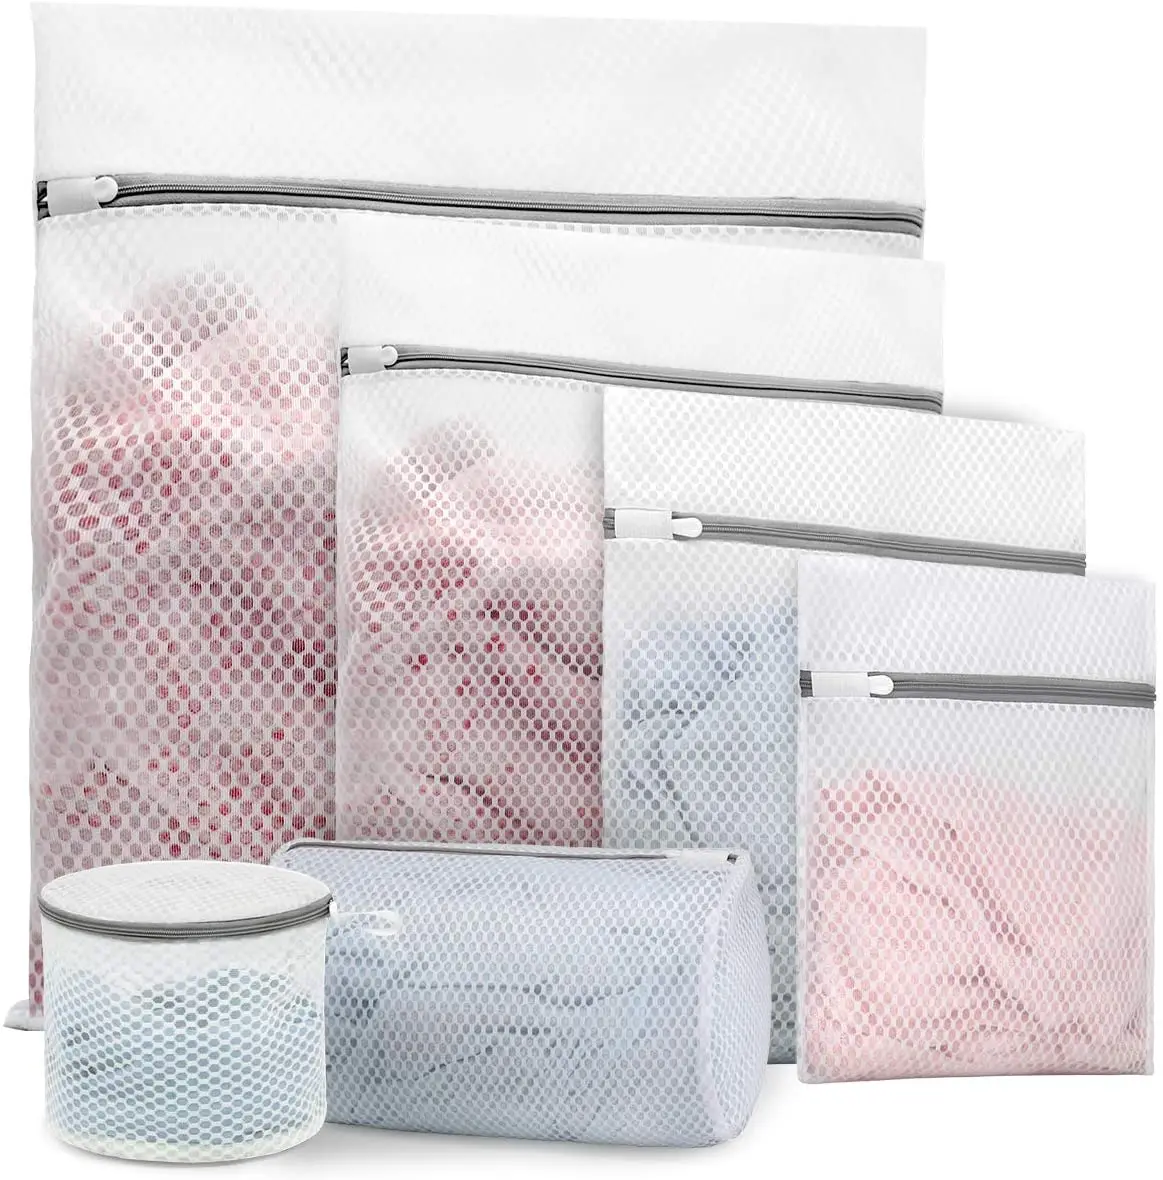 Durable Honeycomb Mesh Laundry Bags for Delicates